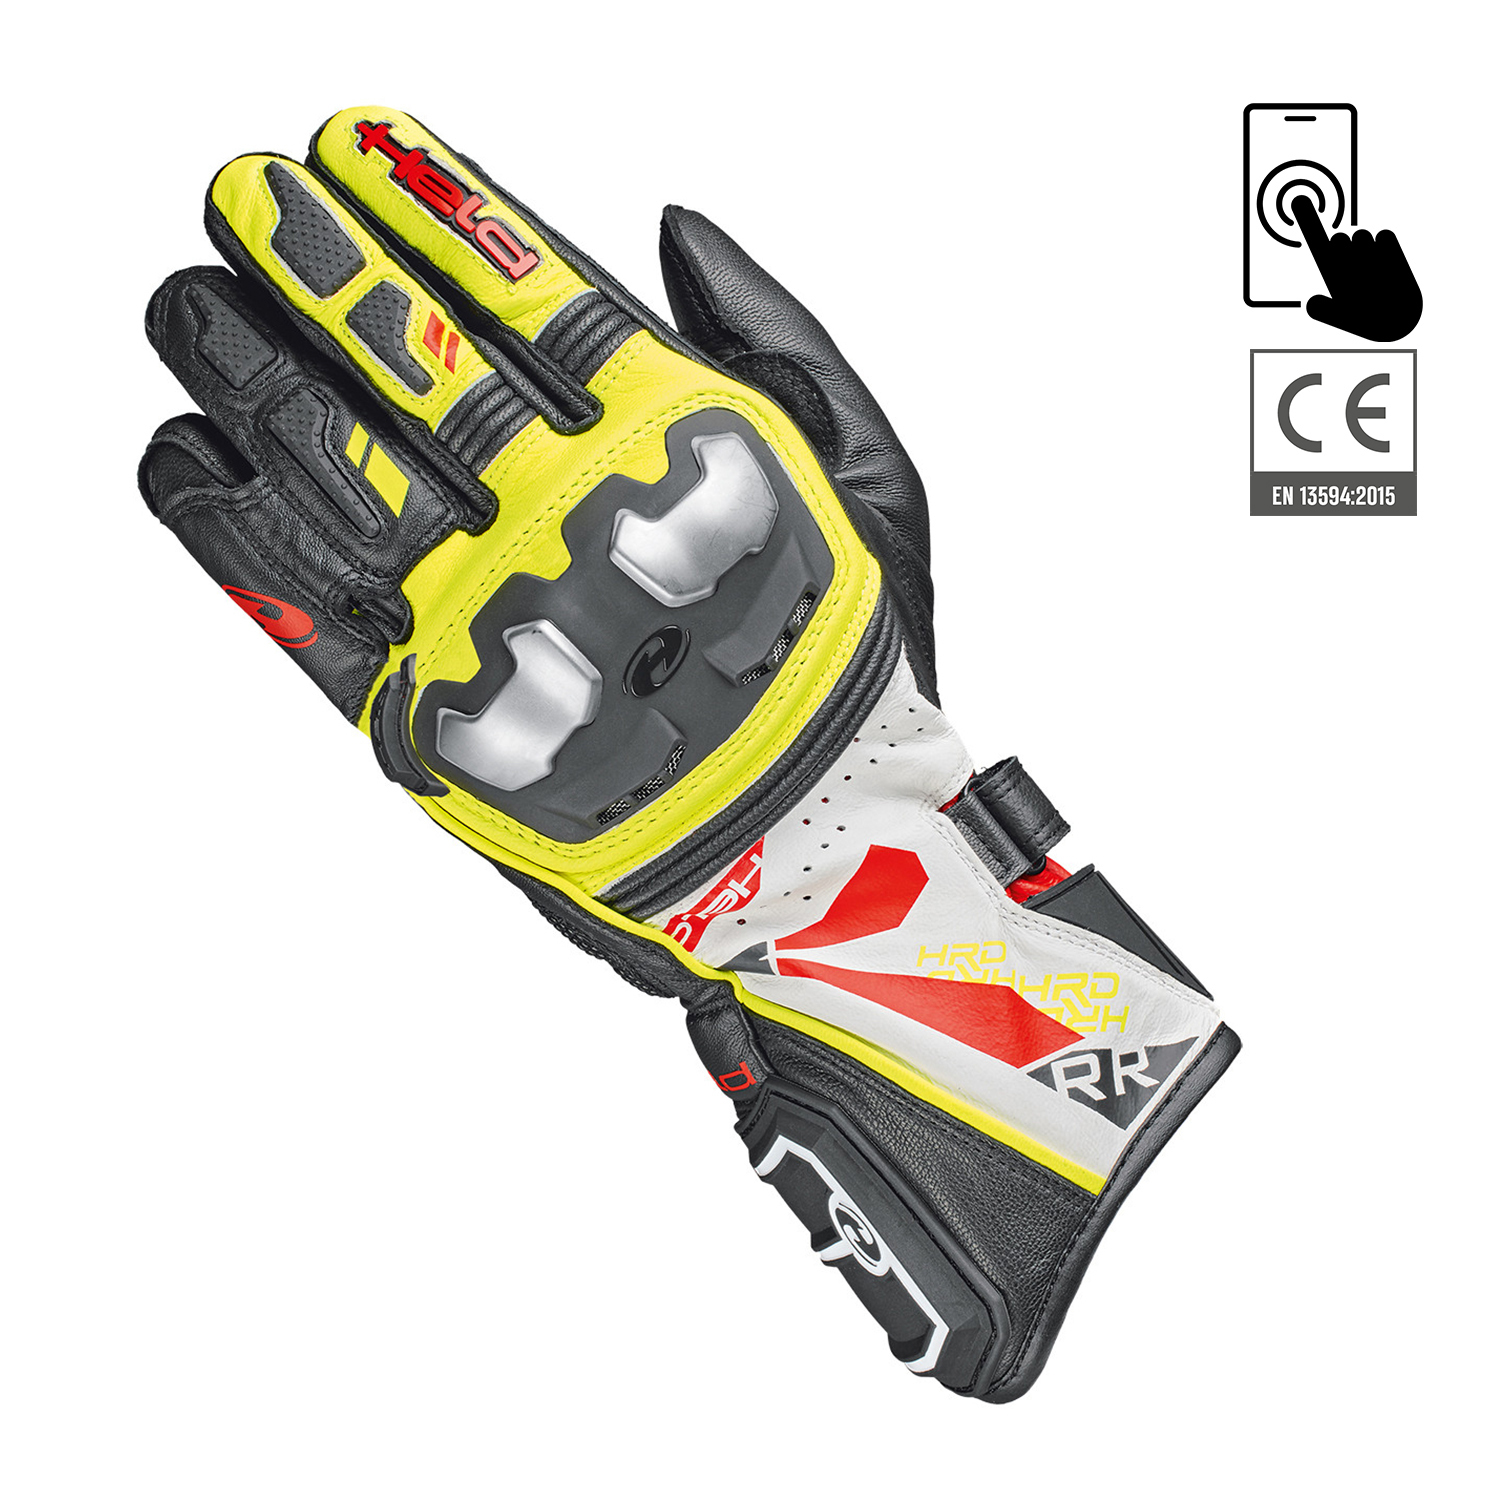 Held Akira RR Gloves Black-Fluorescent Yellow - Available in Various Sizes